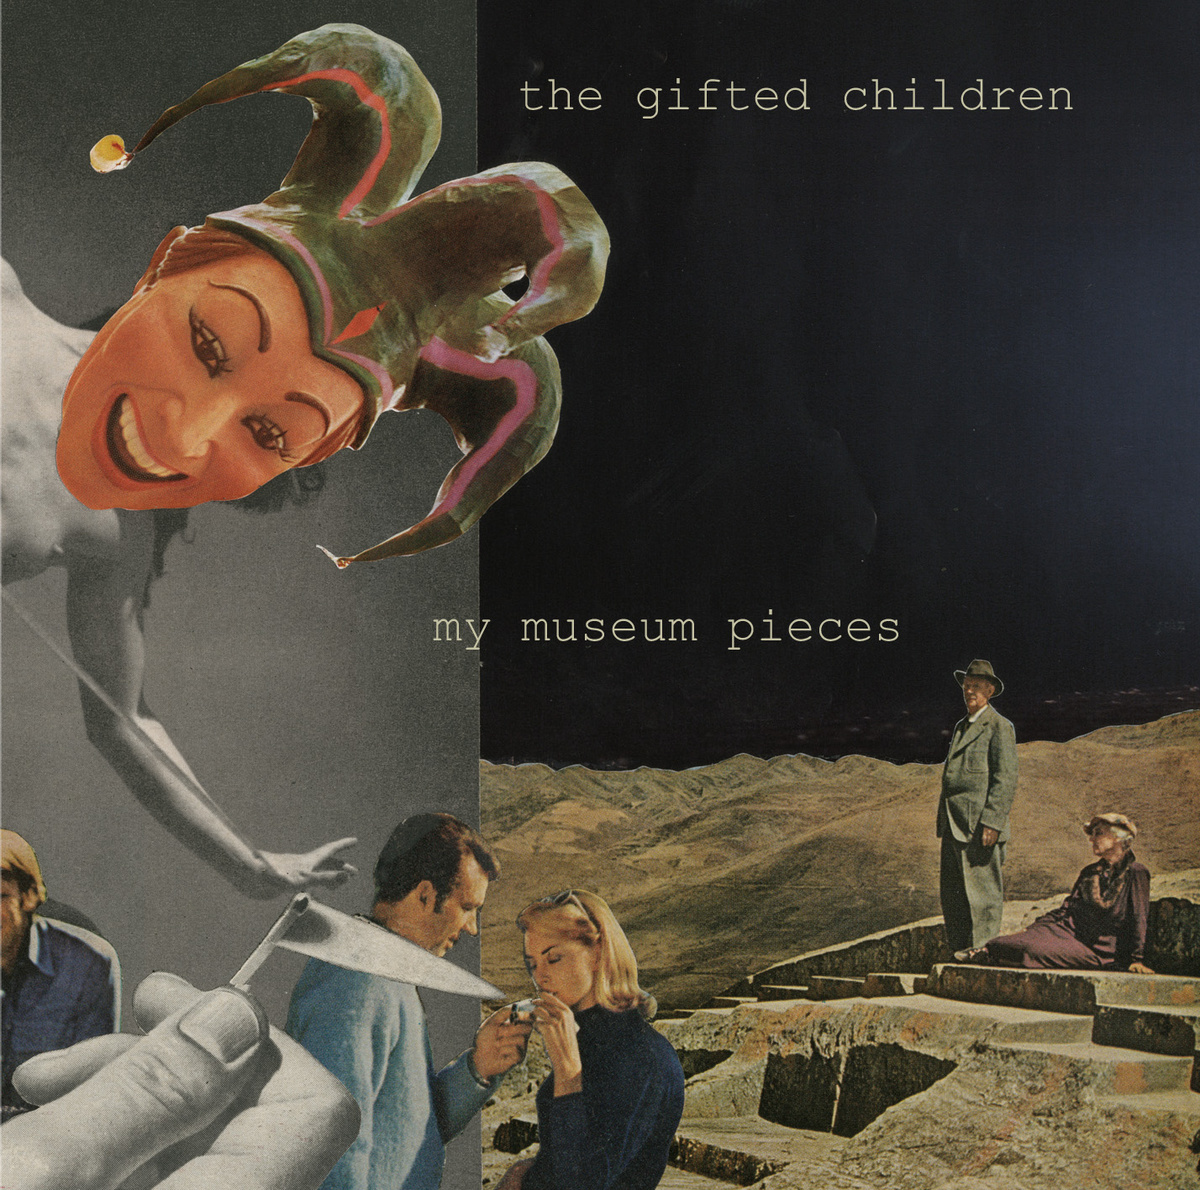 the gifted children – my museum pieces